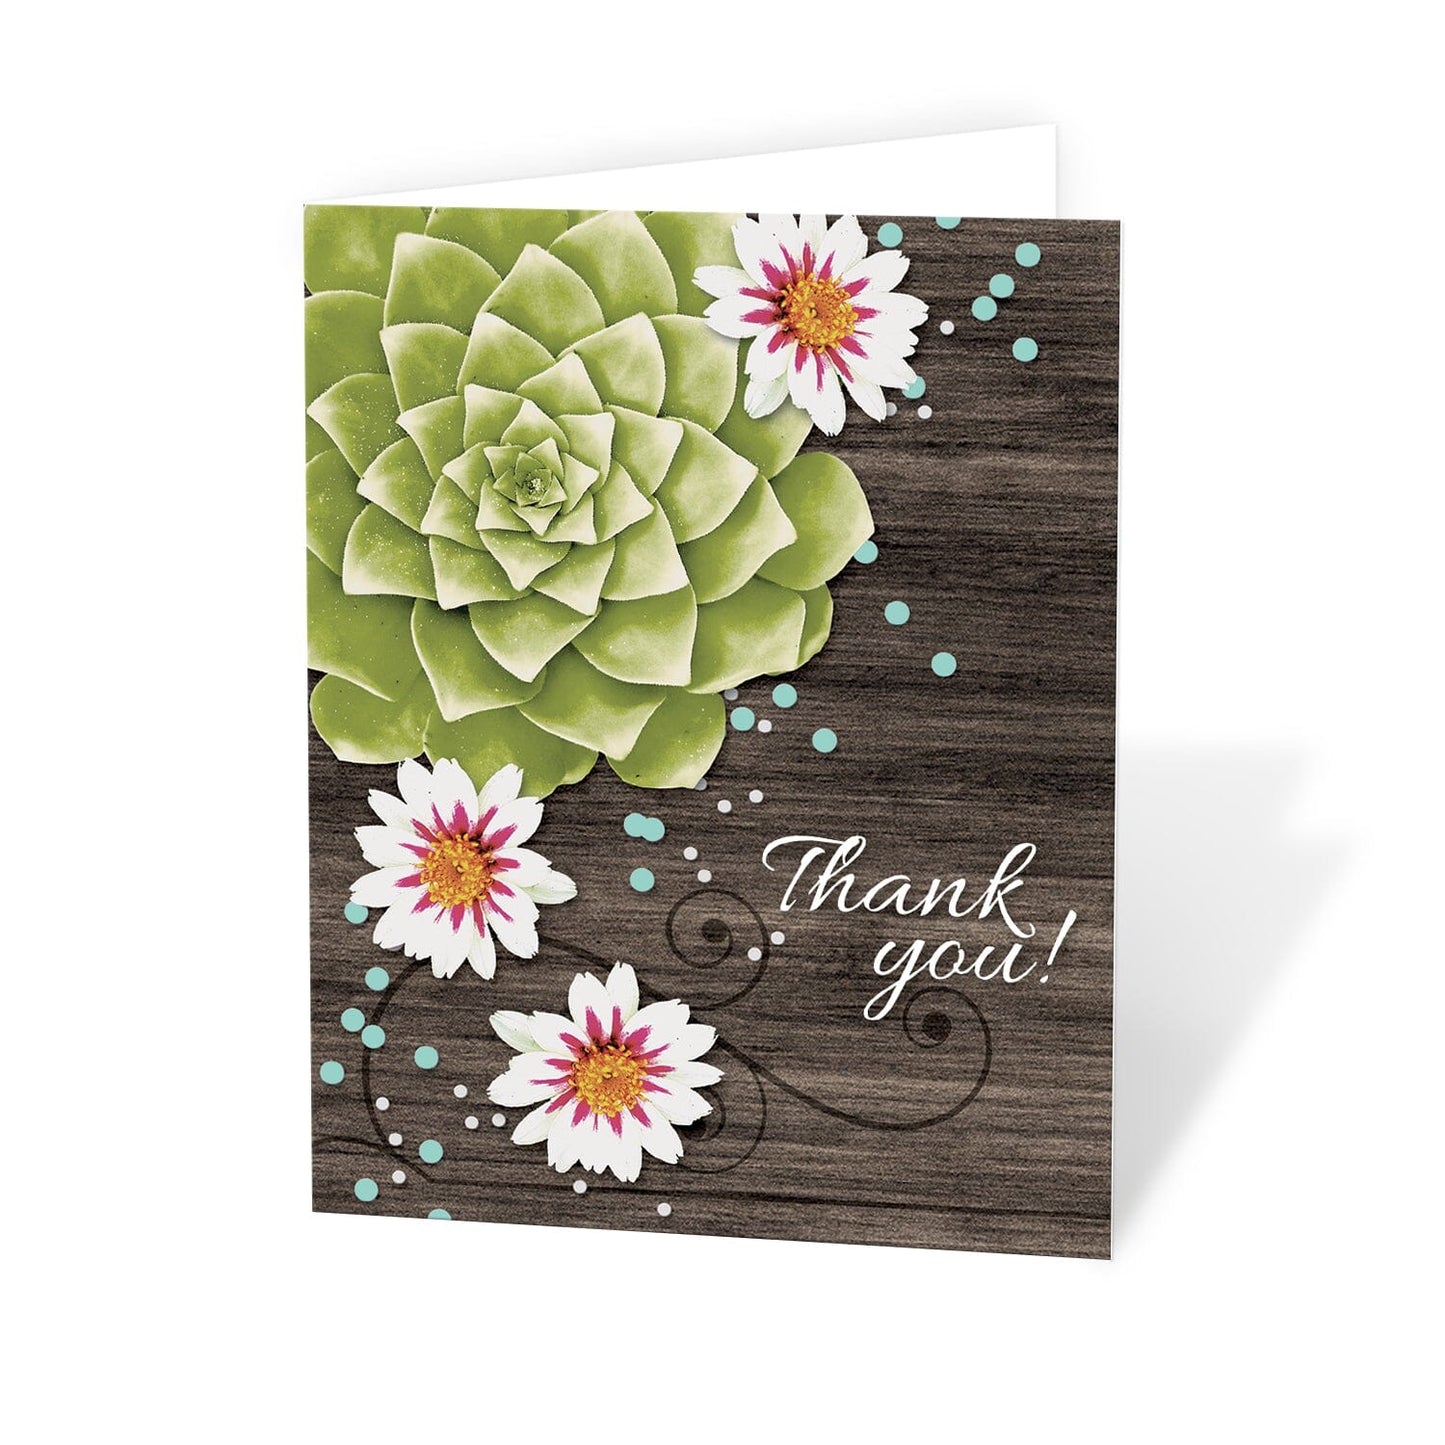 Succulent Rustic Floral Wood Thank You Cards (with teal accents) at Artistically Invited. 